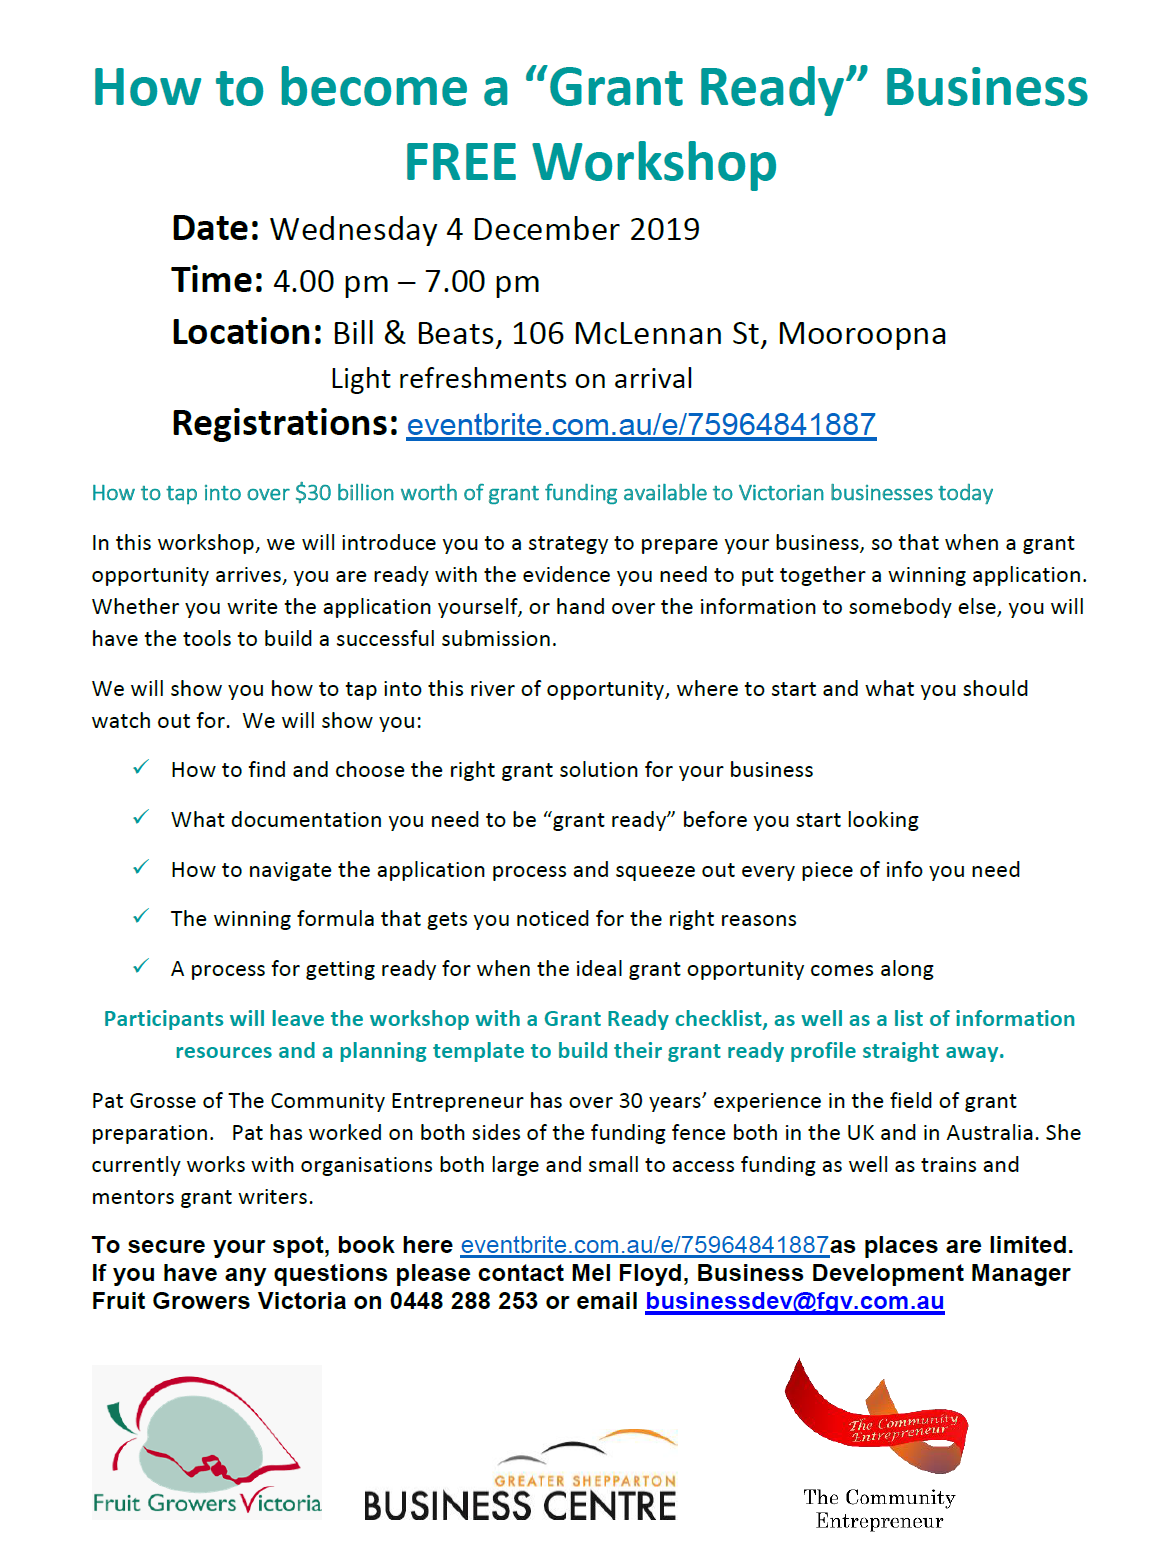 How to become a 'Grant Ready Business'- FREE Workshop- Wednesday 4th December 2019 from 4:00pm-7:00pm